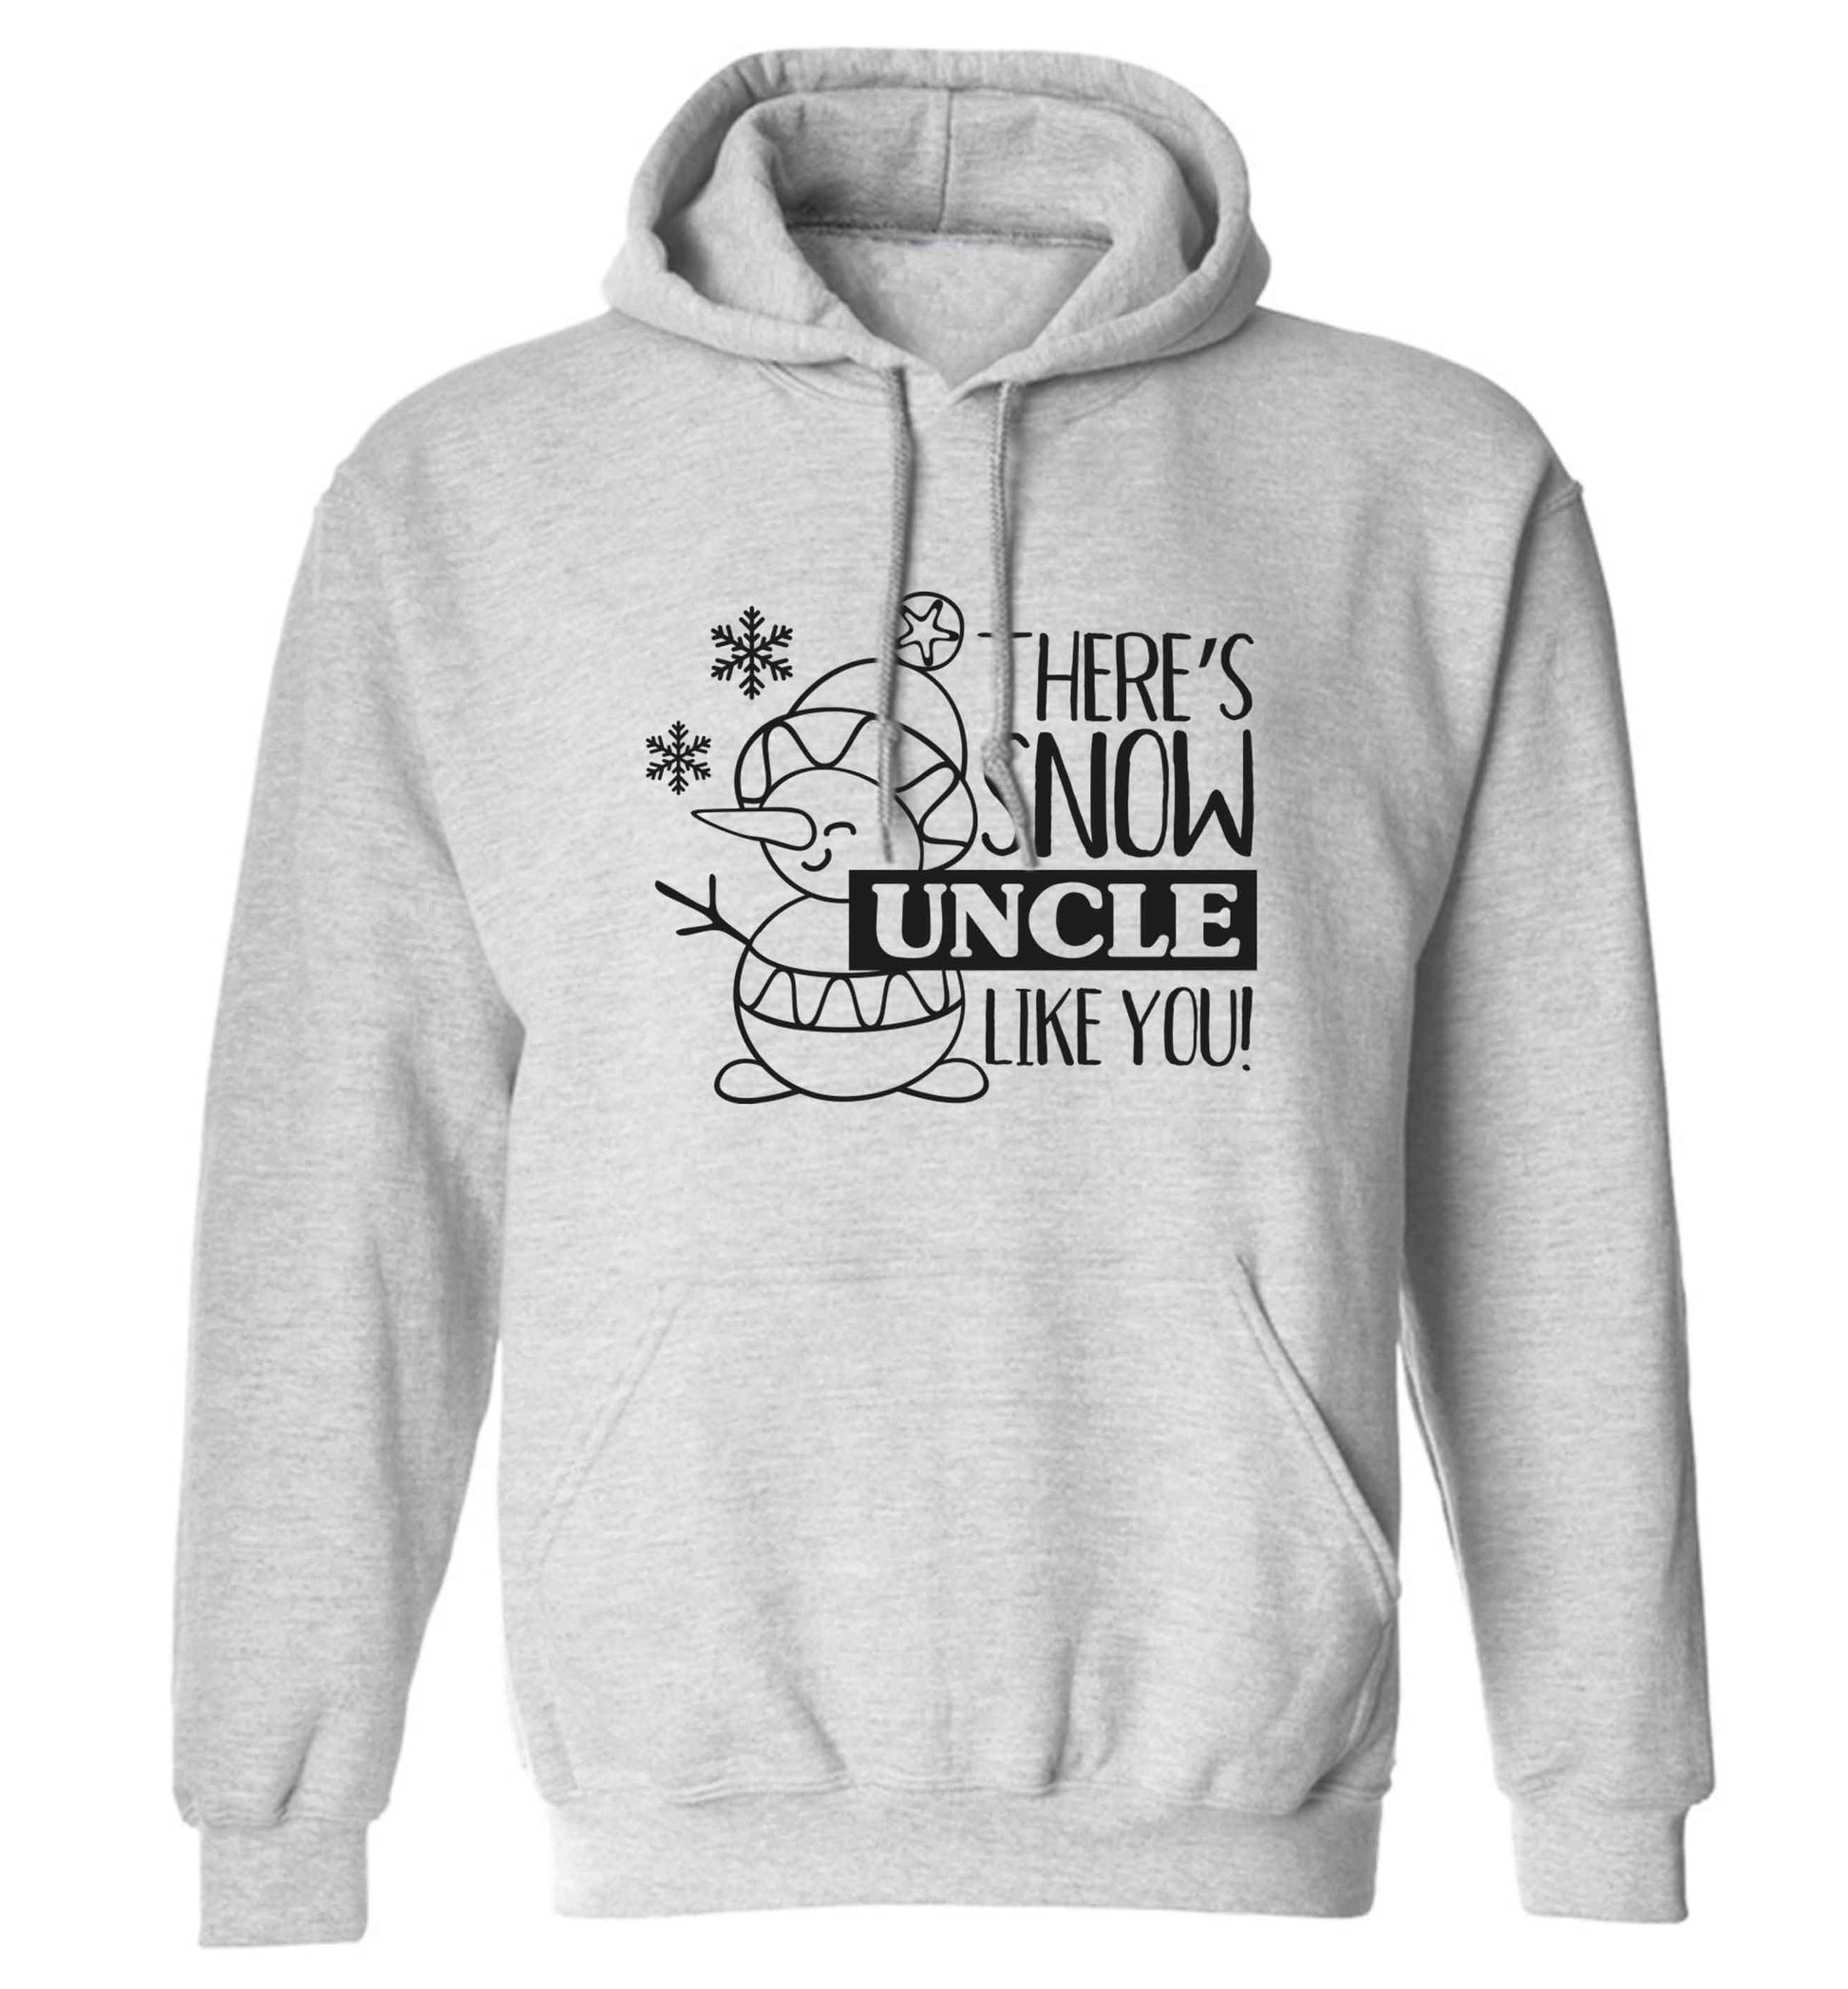 There's snow uncle like you adults unisex grey hoodie 2XL